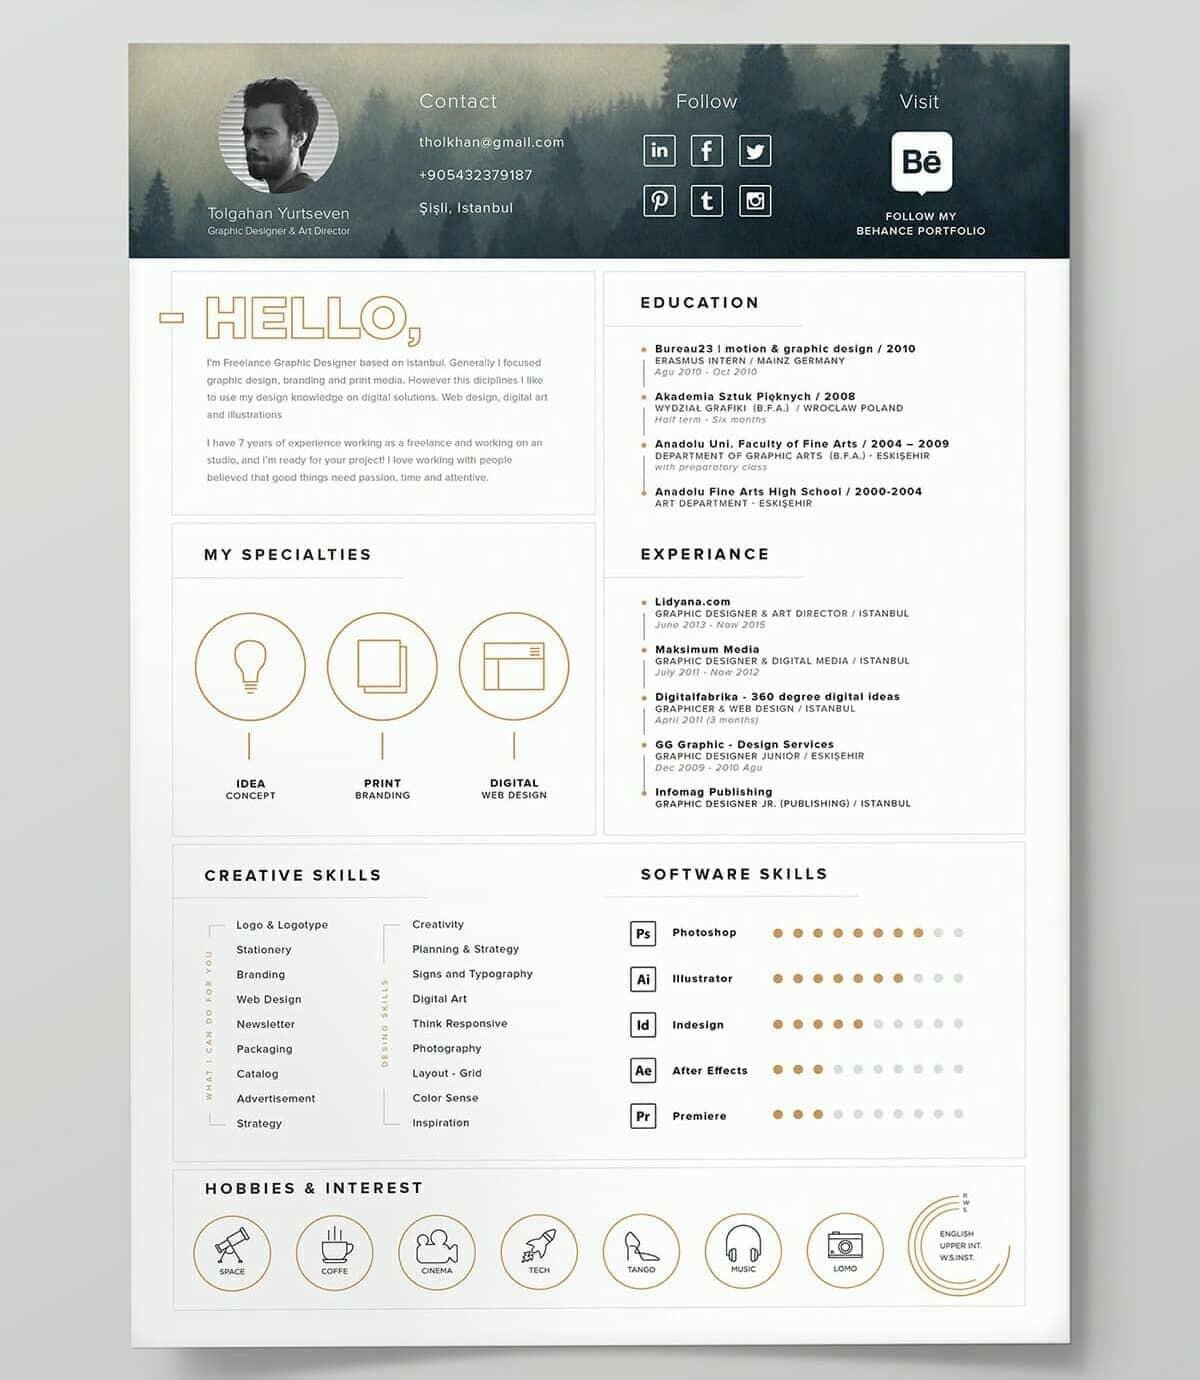 best resume layout template